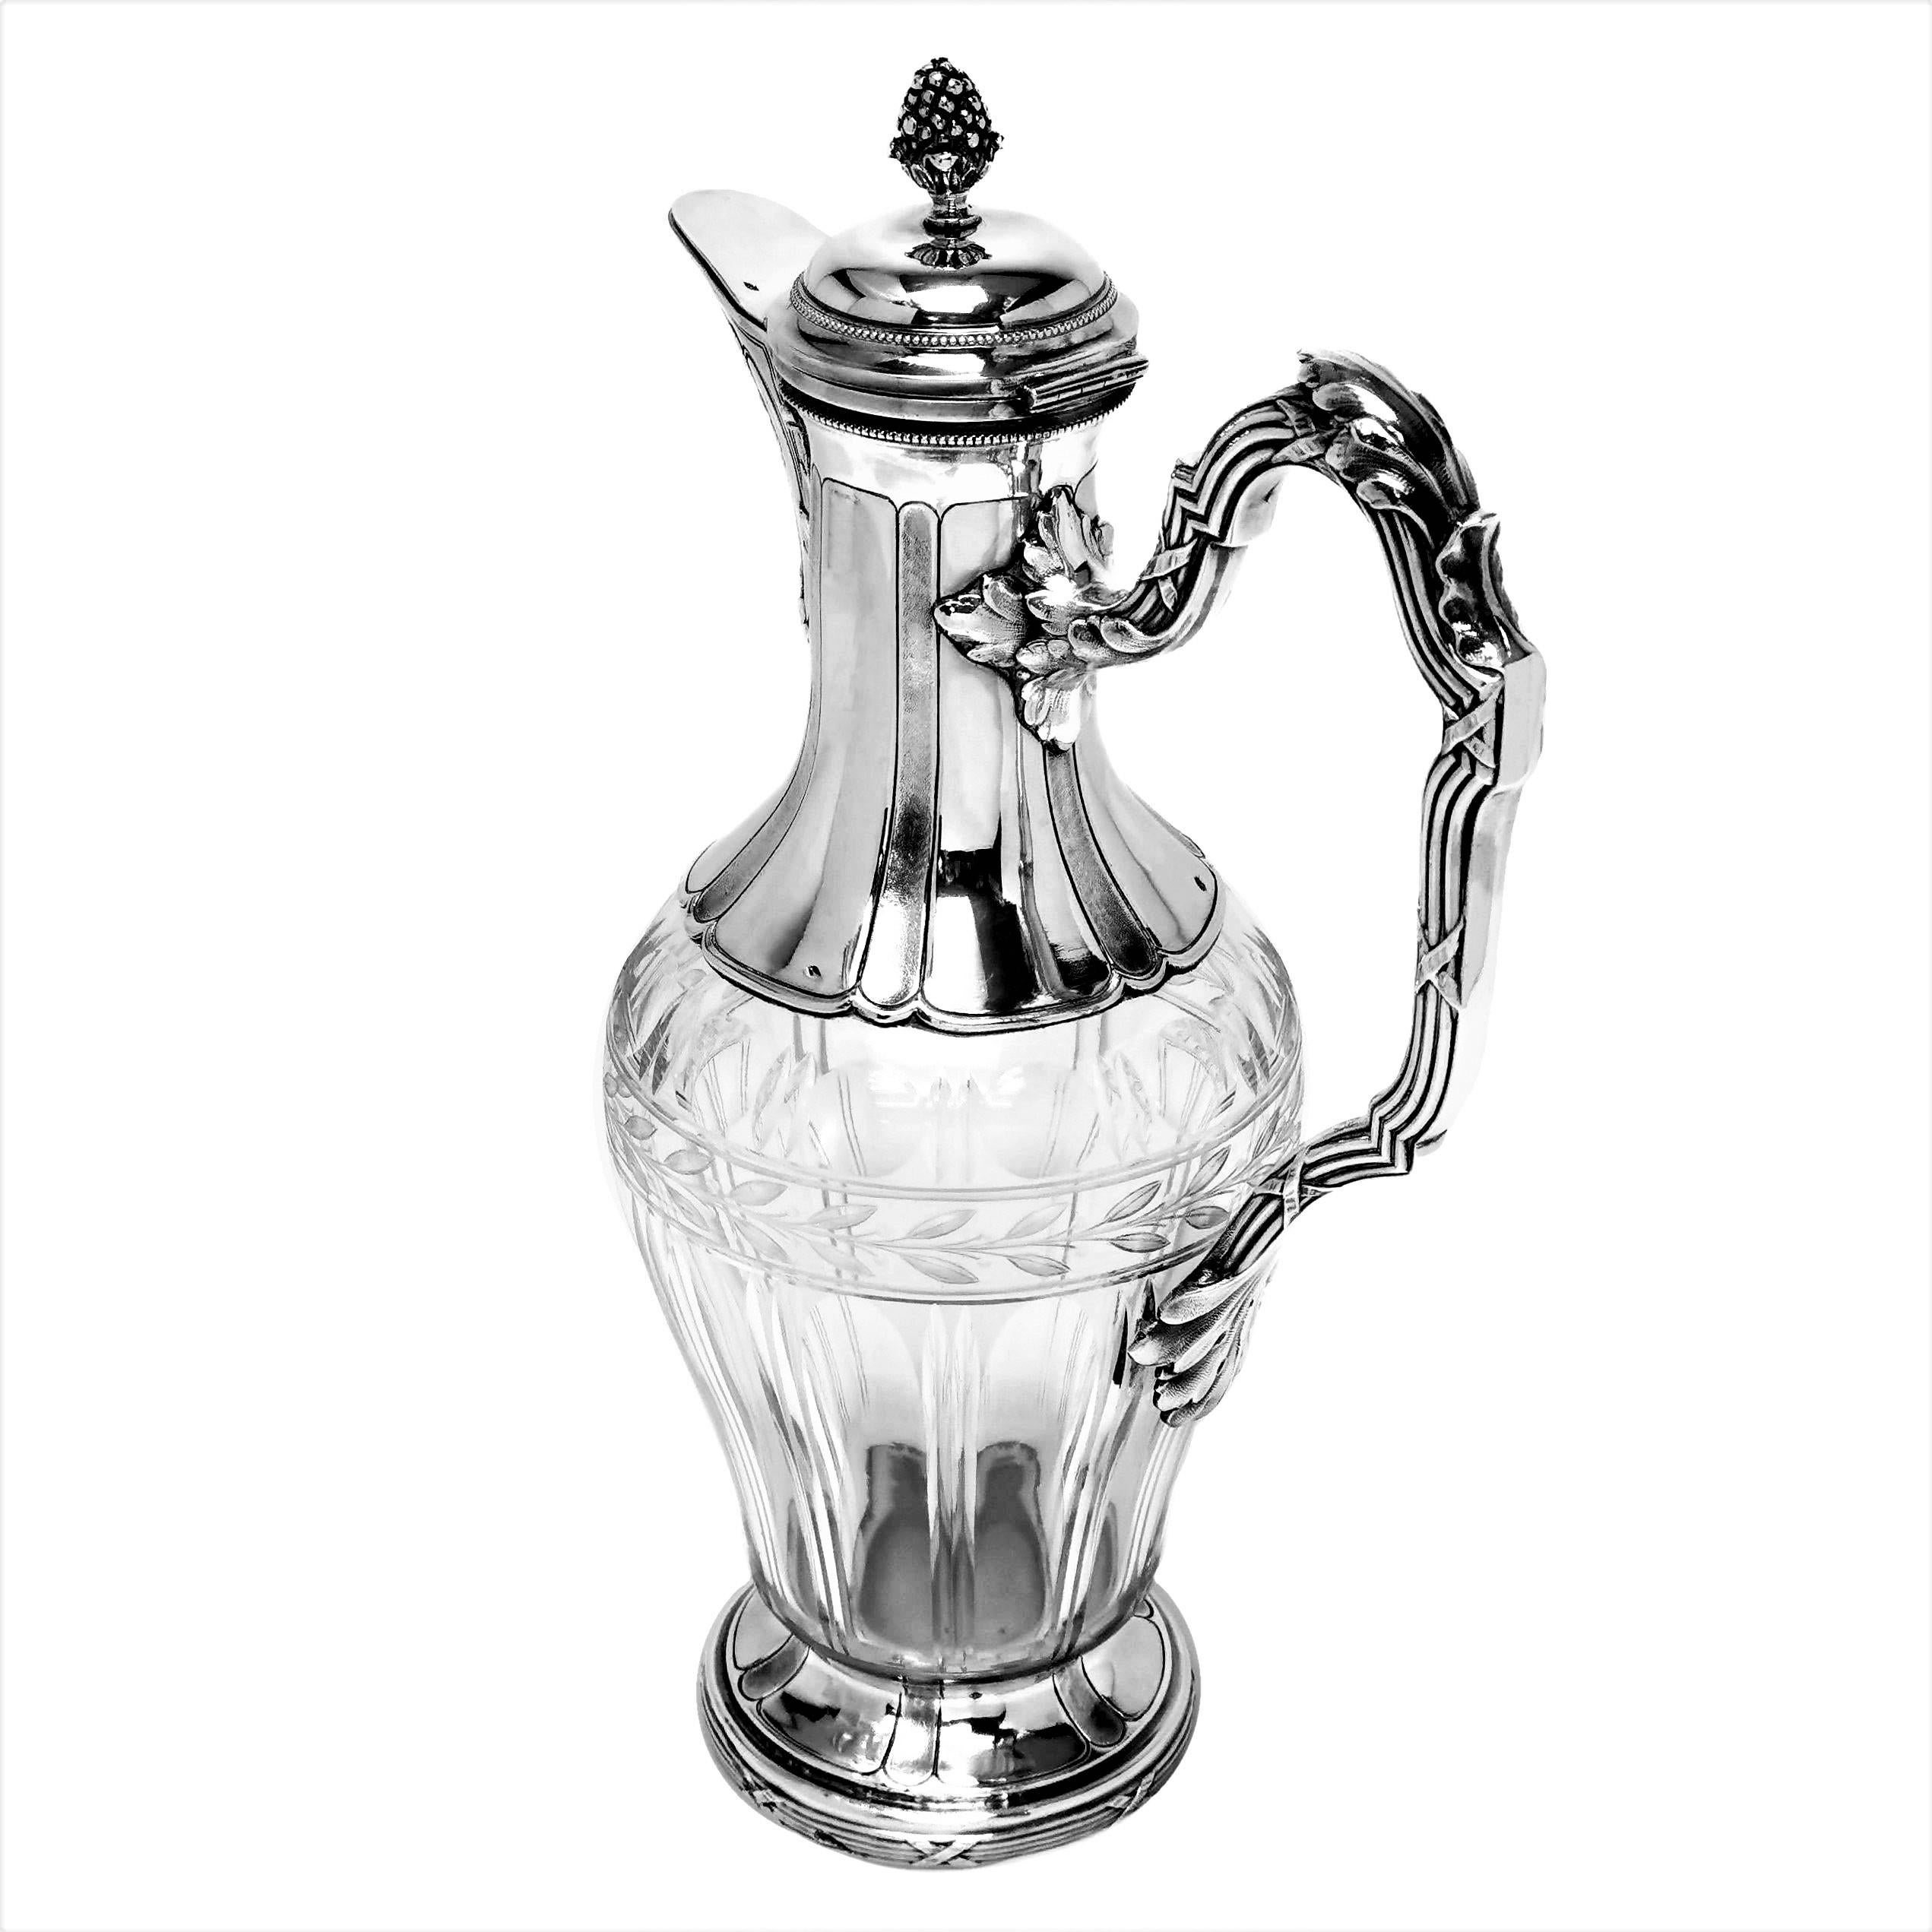 19th Century Pair Antique French Solid Silver & Glass Claret Jugs / Wine Decanters, c. 1890